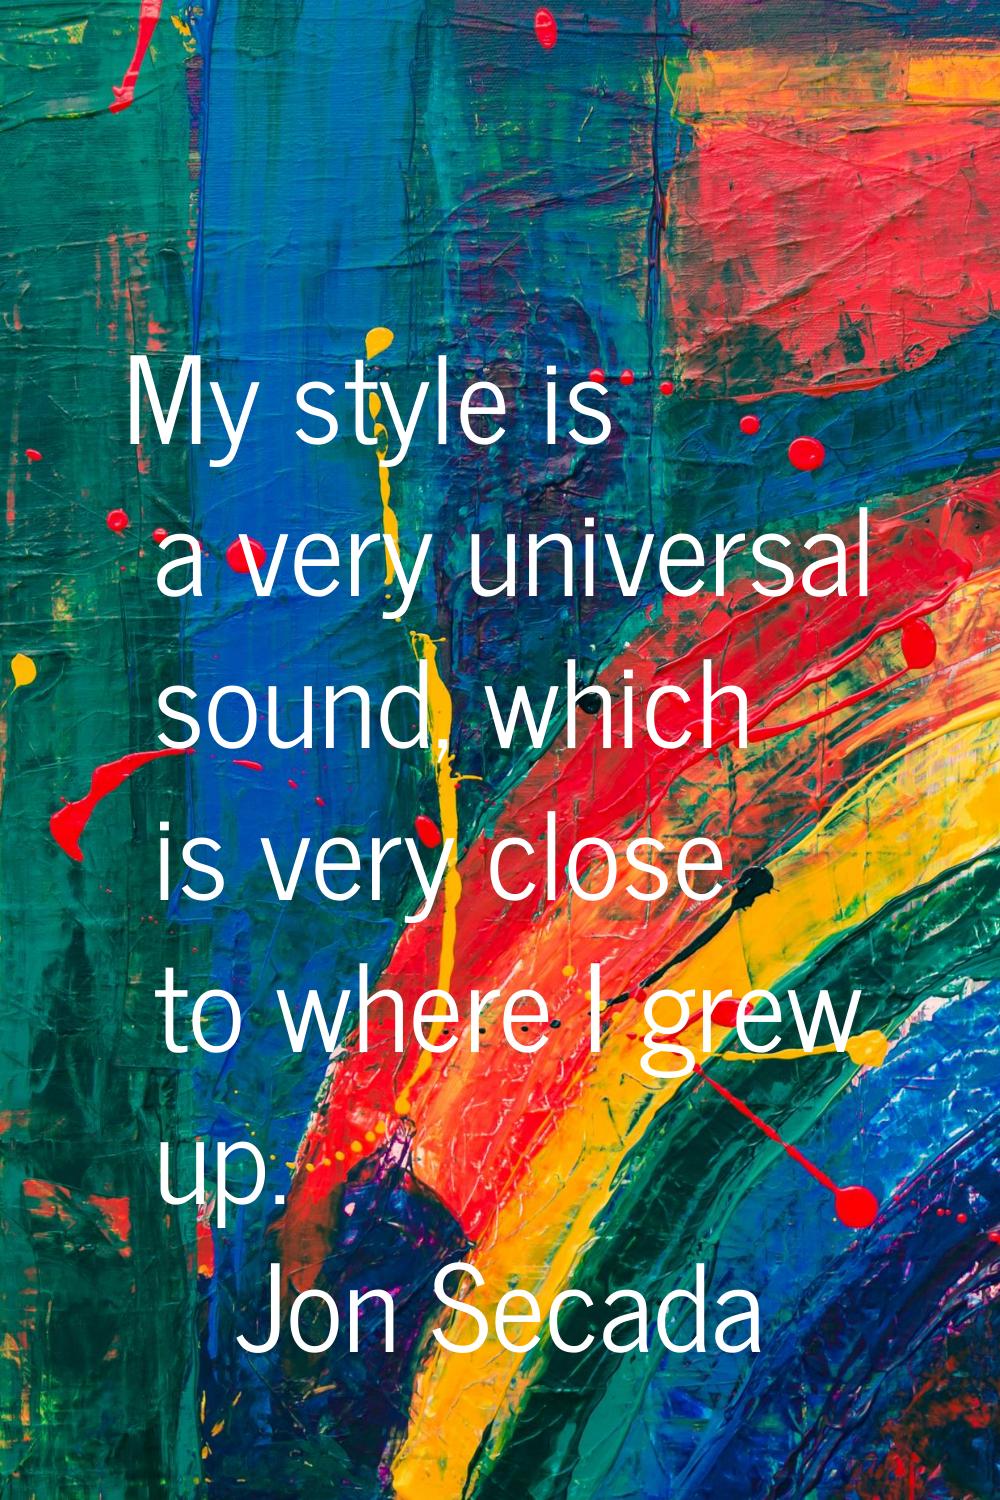 My style is a very universal sound, which is very close to where I grew up.